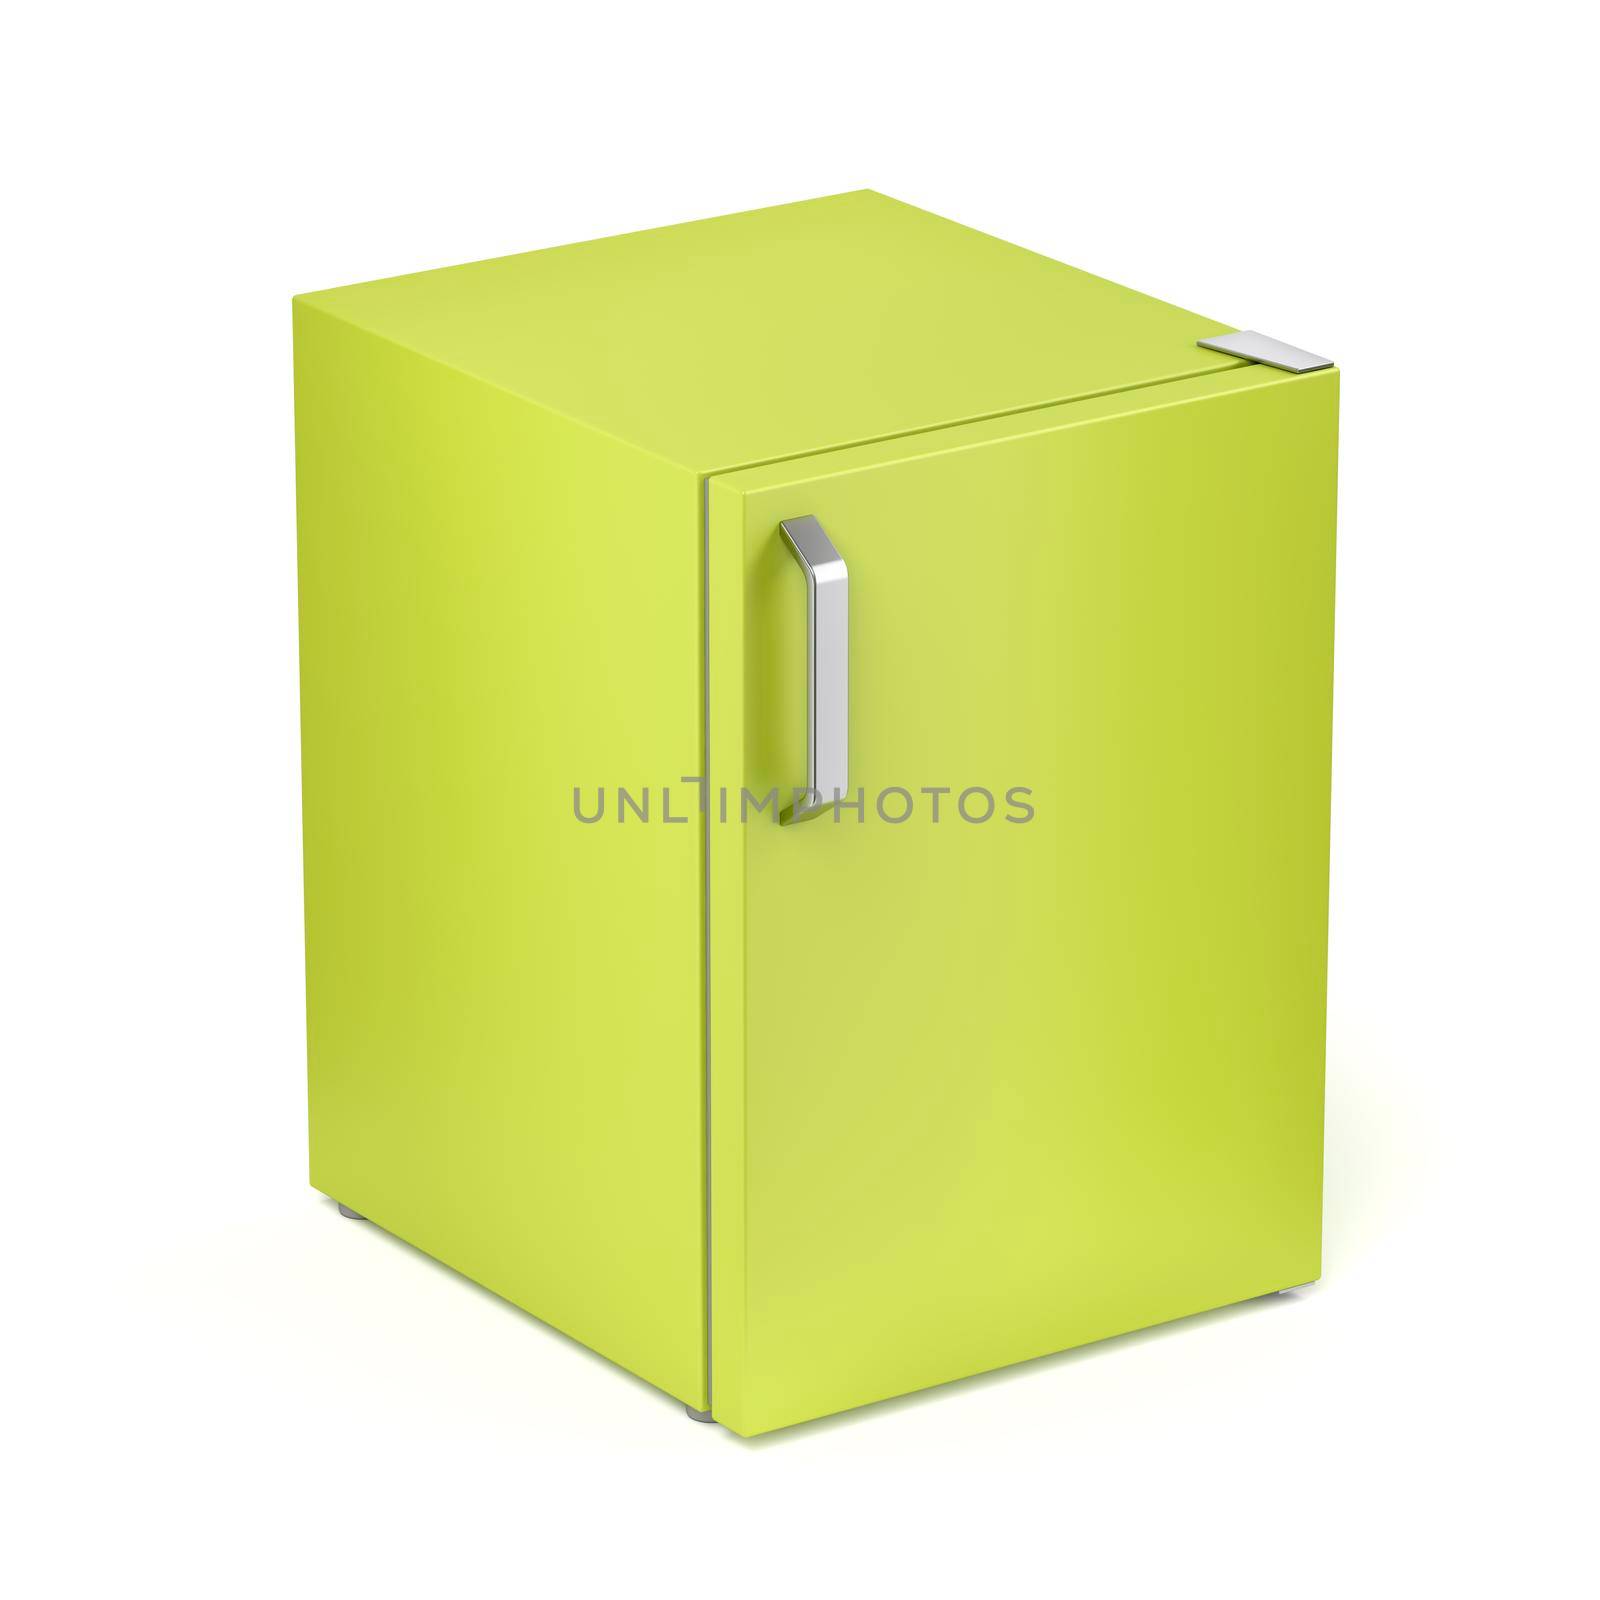 Small refrigerator on white background